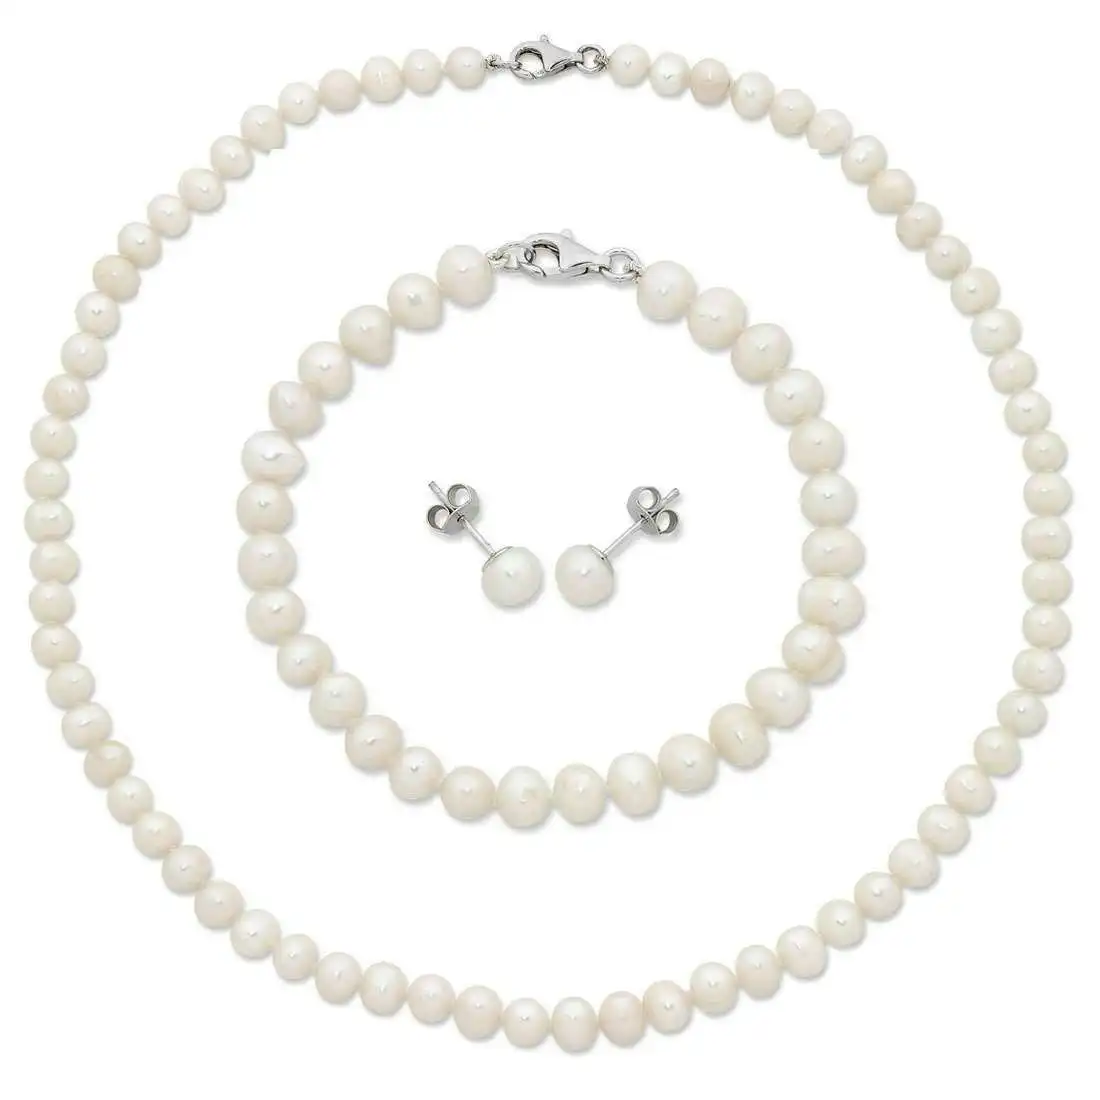 Sterling Silver White Freshwater Pearl Necklace, Bracelet and Earring Set